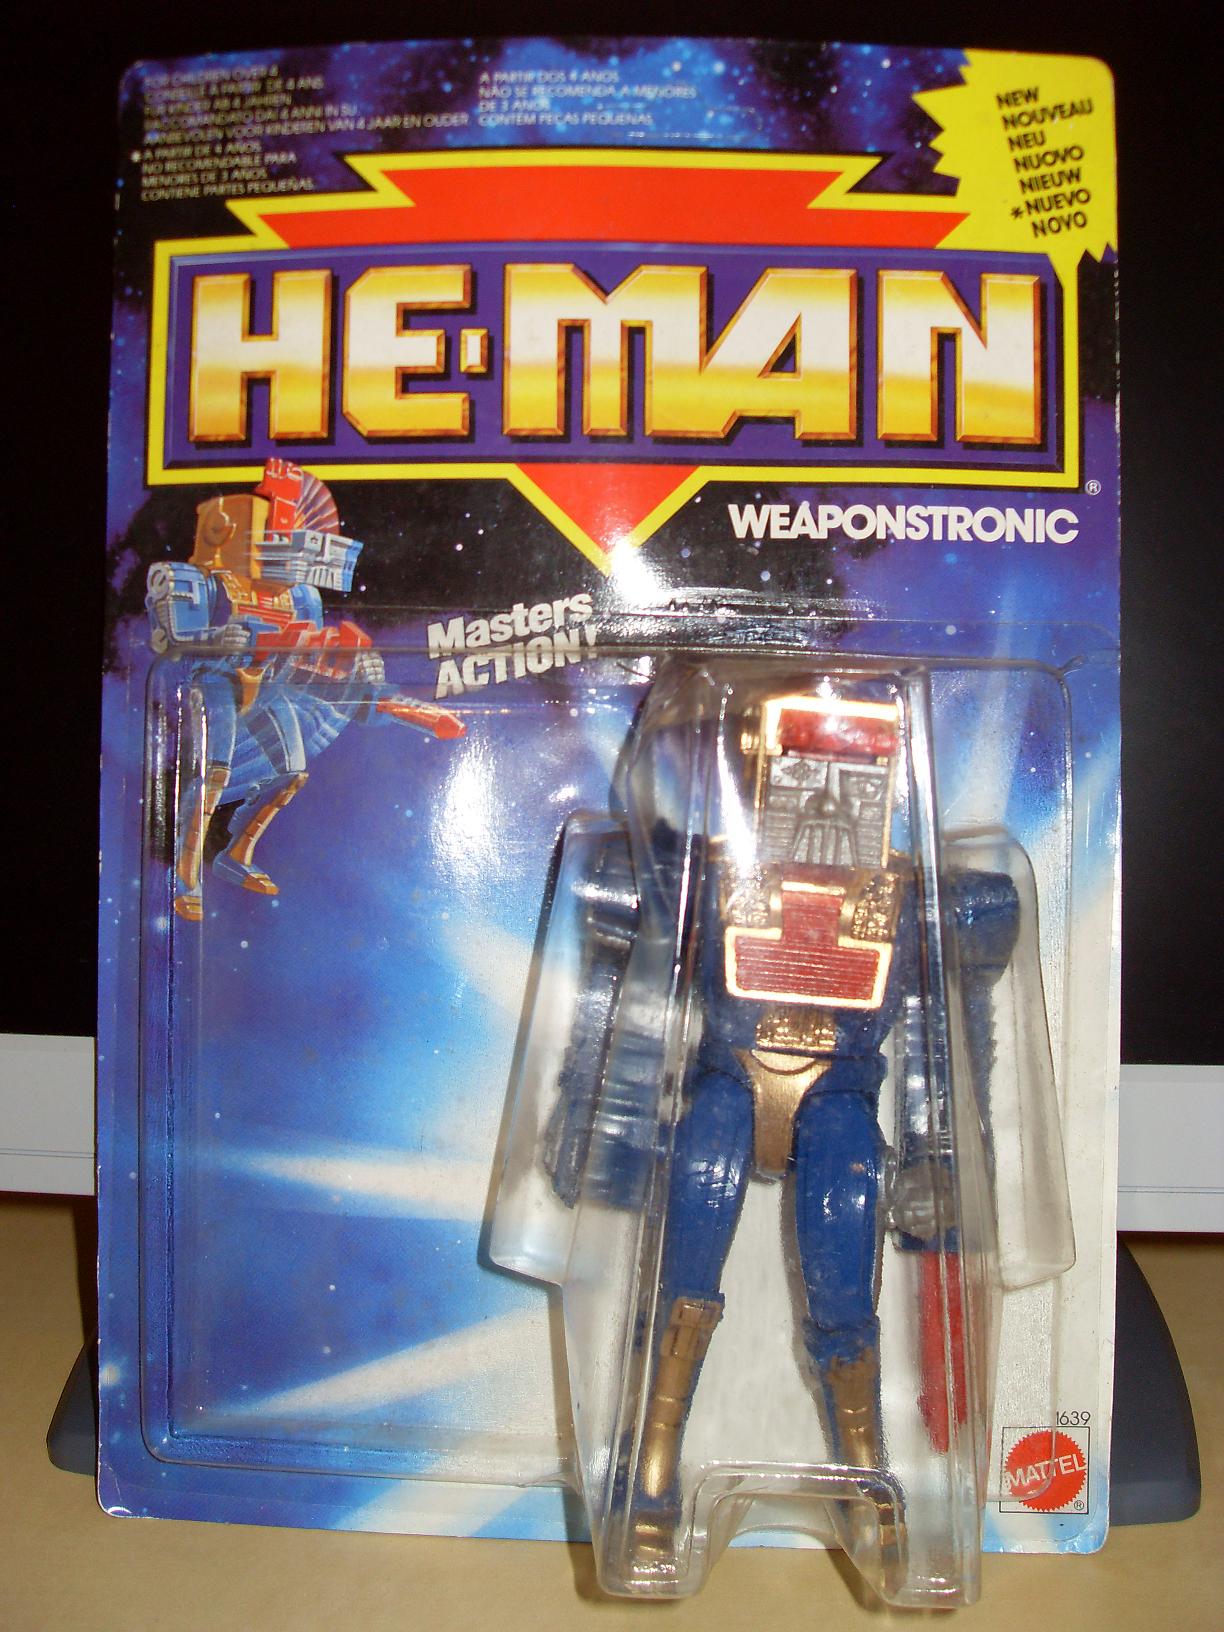 LORD HE-MAN Colecction 8378